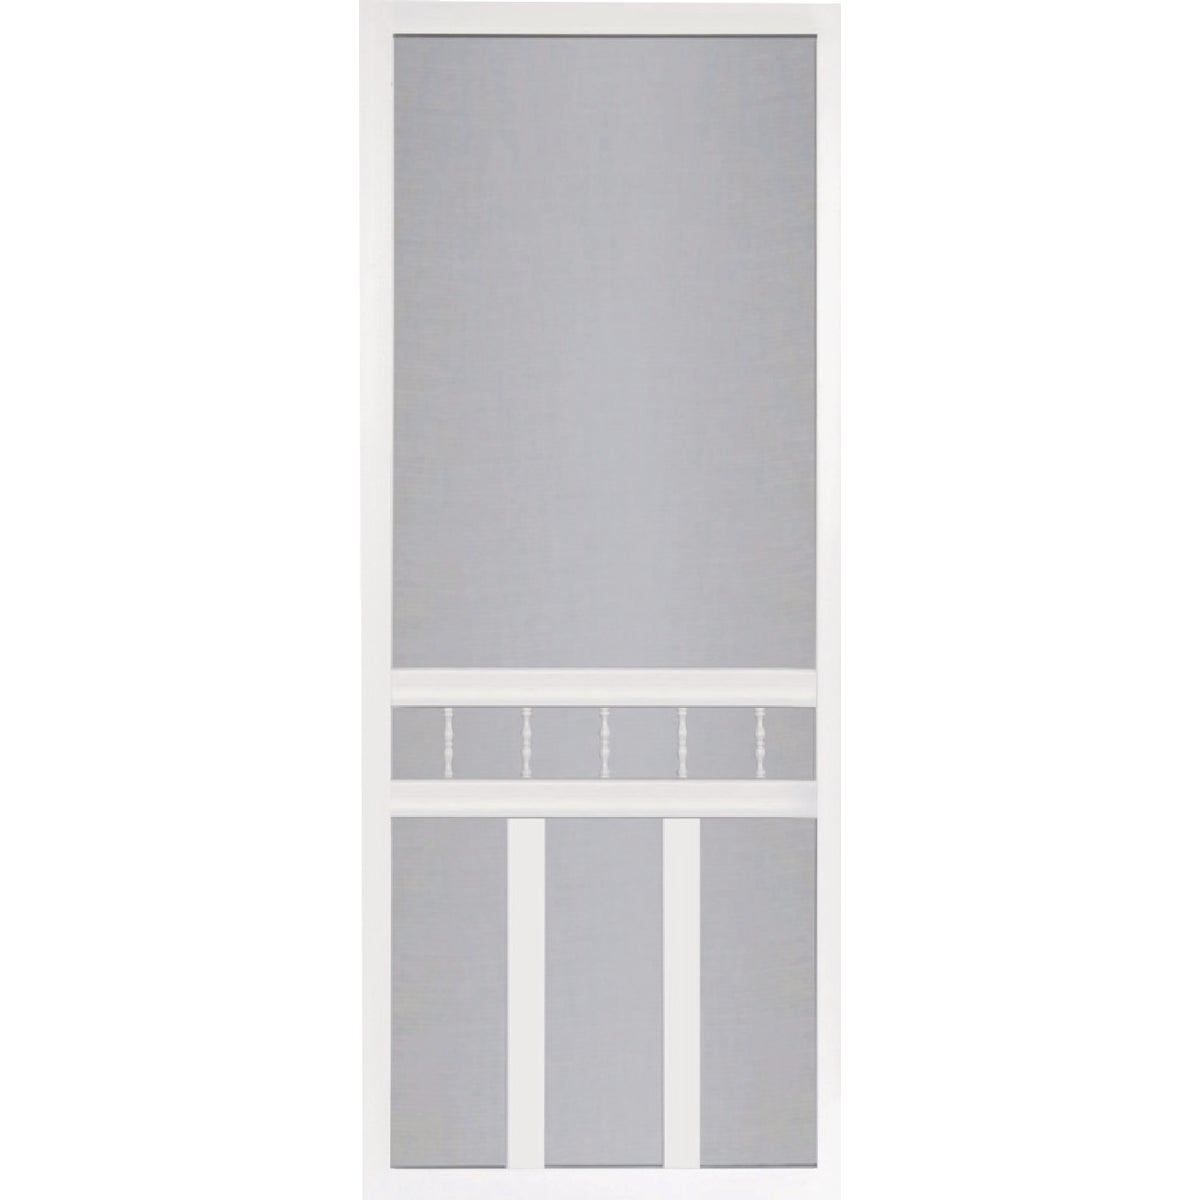 Screen Tight Waccamaw 36 In. W x 80 In. H x 1 In. Thick White Vinyl Screen Door